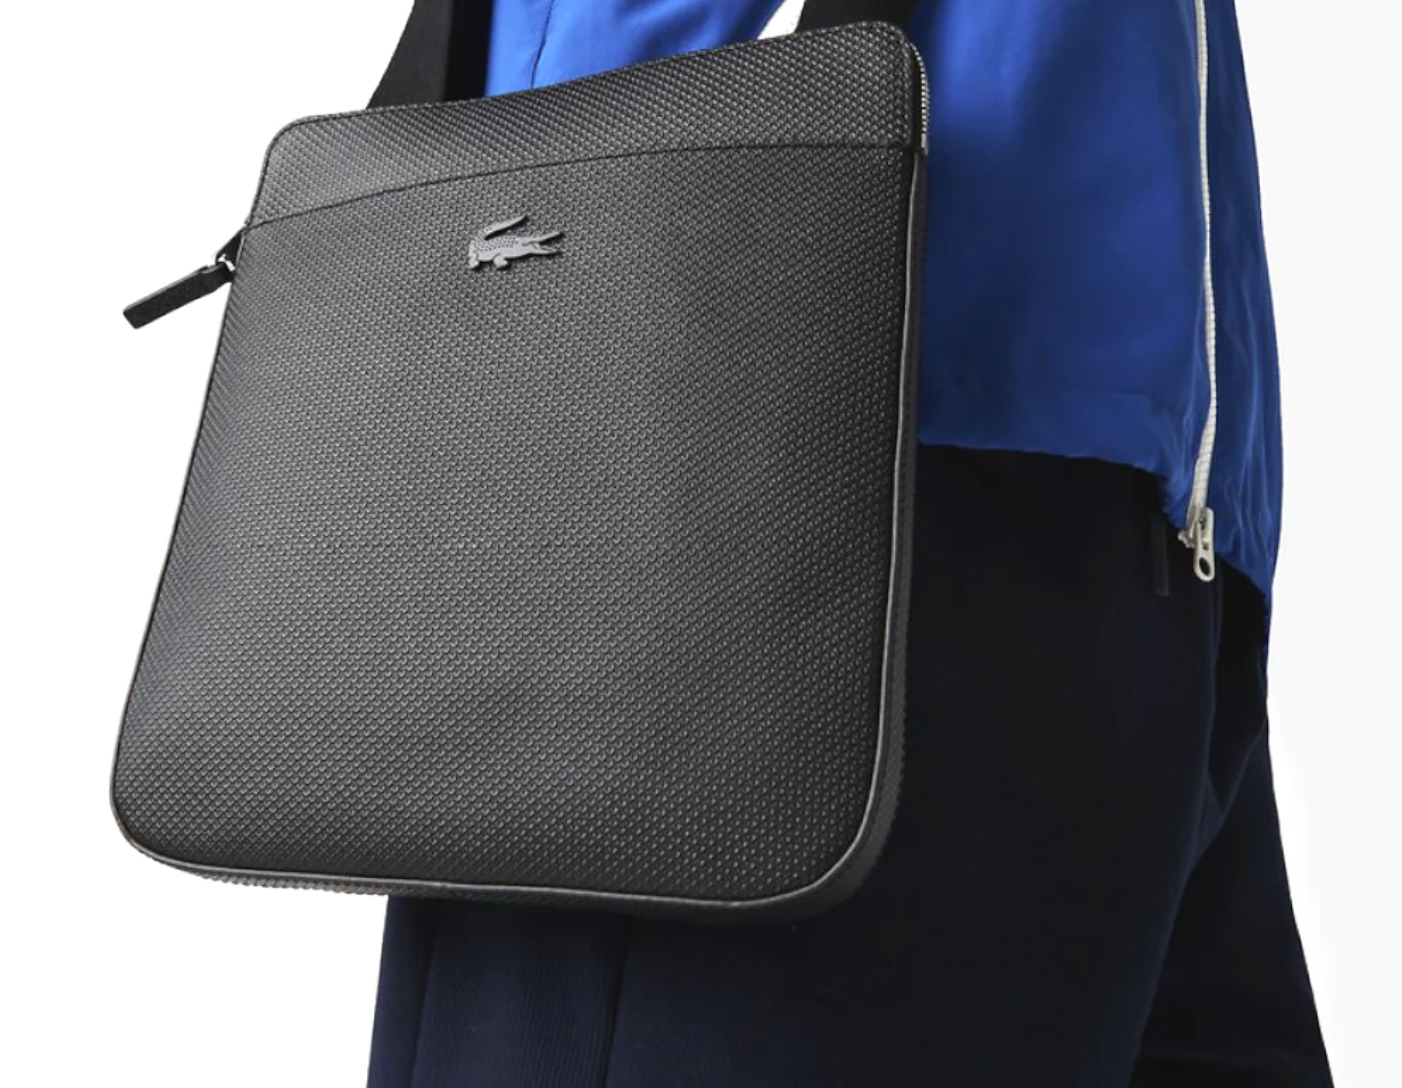 Lacoste Flat Chantaco Crossover Leather Bag